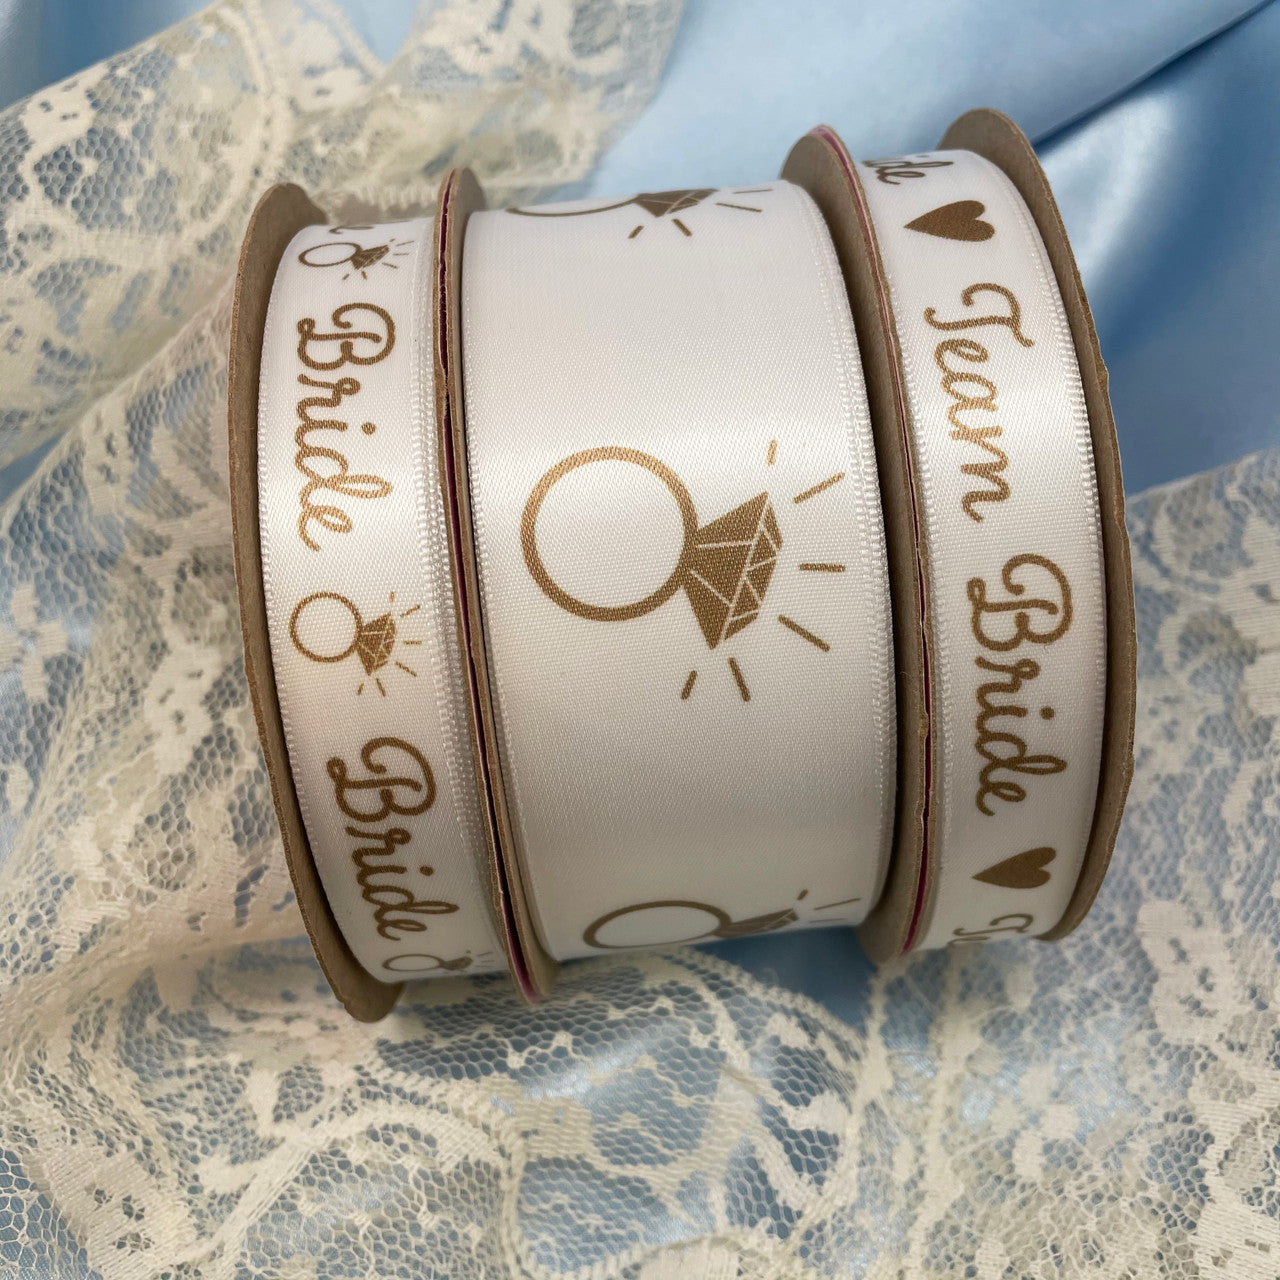 Pair our team bride ribbon with  our engagement ring and bride ribbons for a decorating bridal showers and engagement parties!